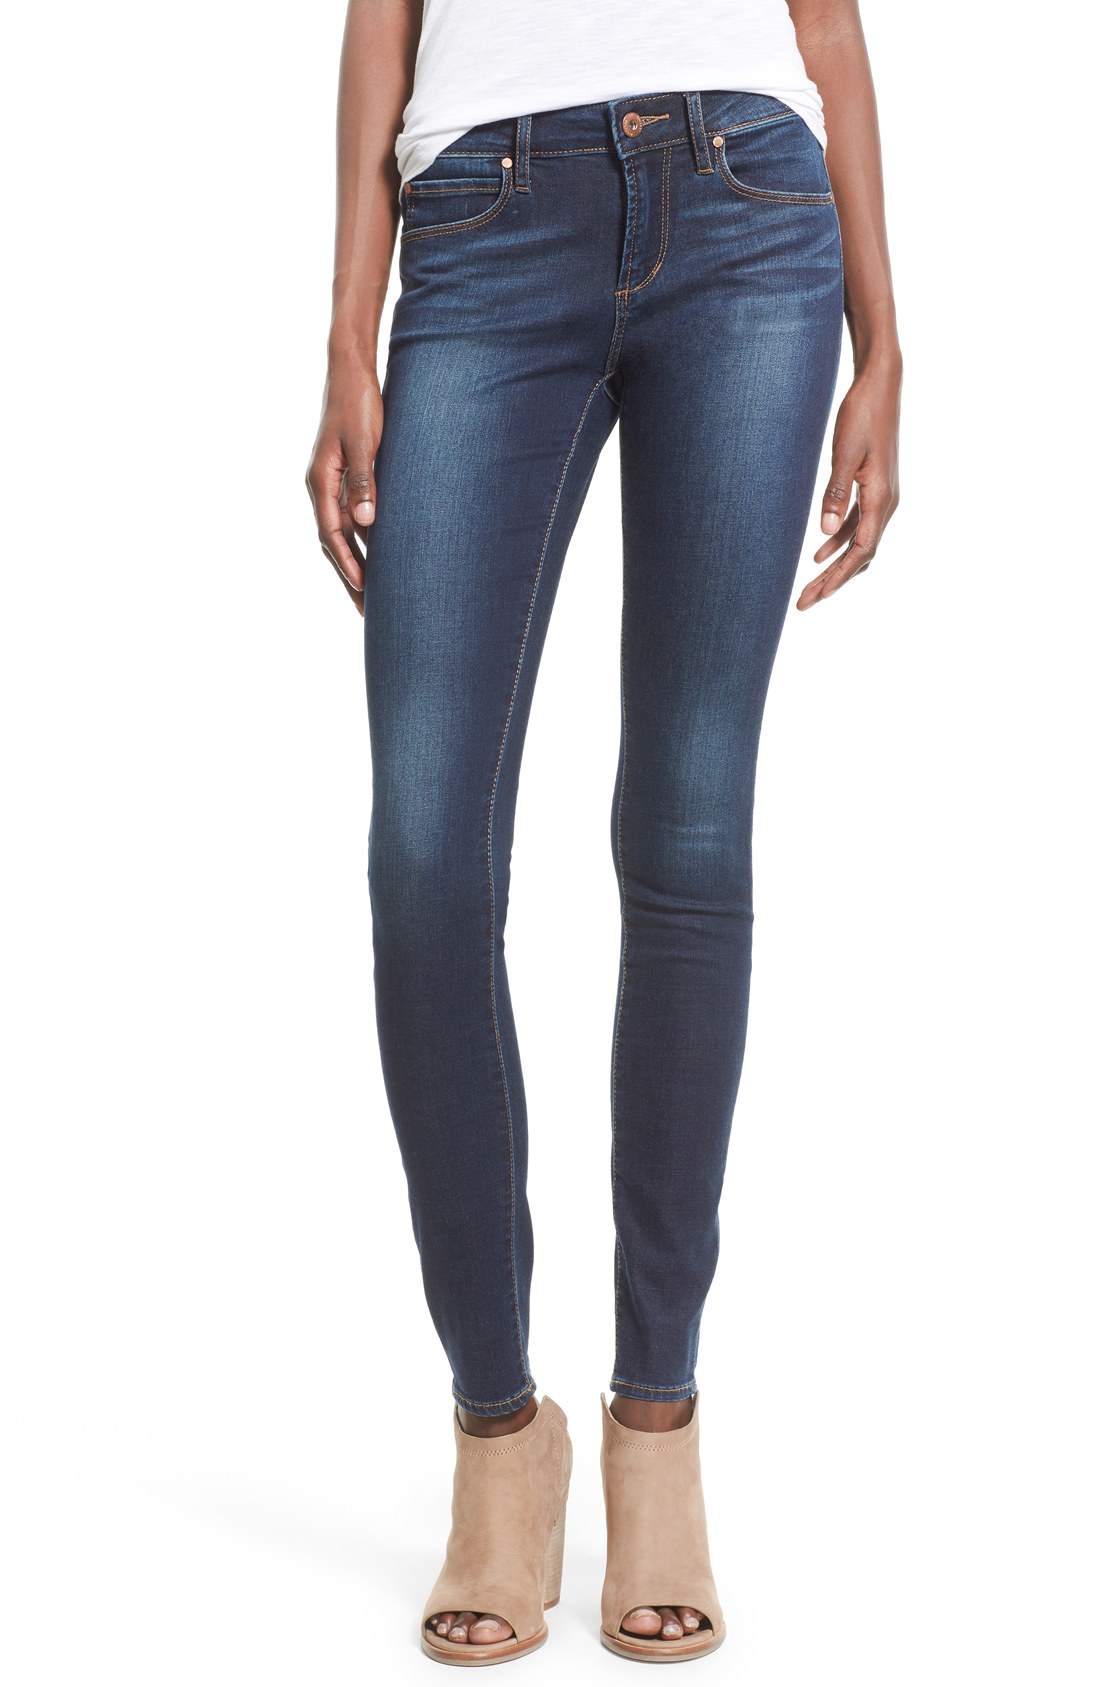 Womens Jeans – All the Types and Version